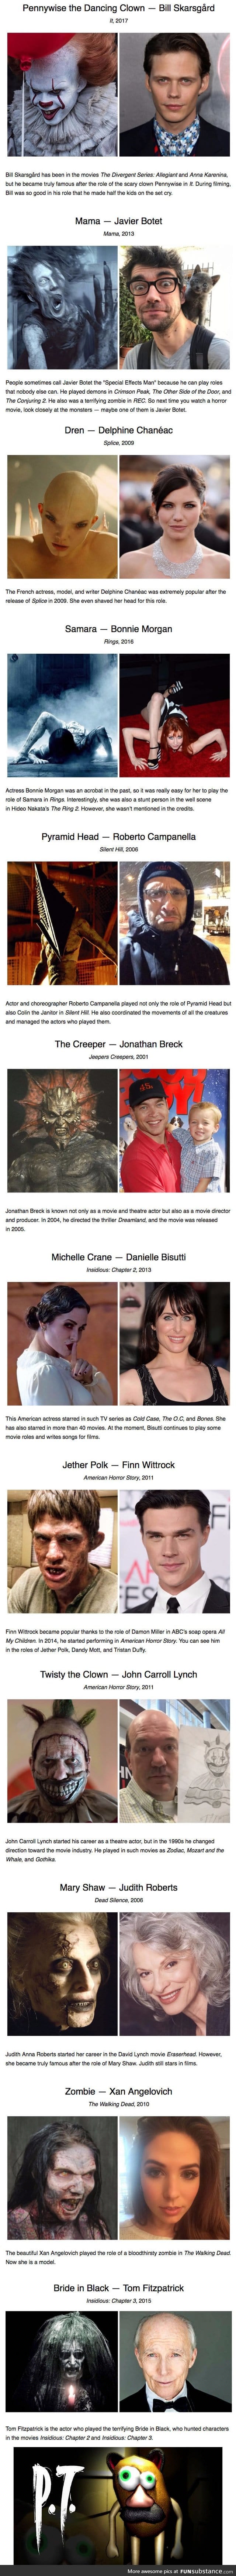 What horror movie stars look like in real life now